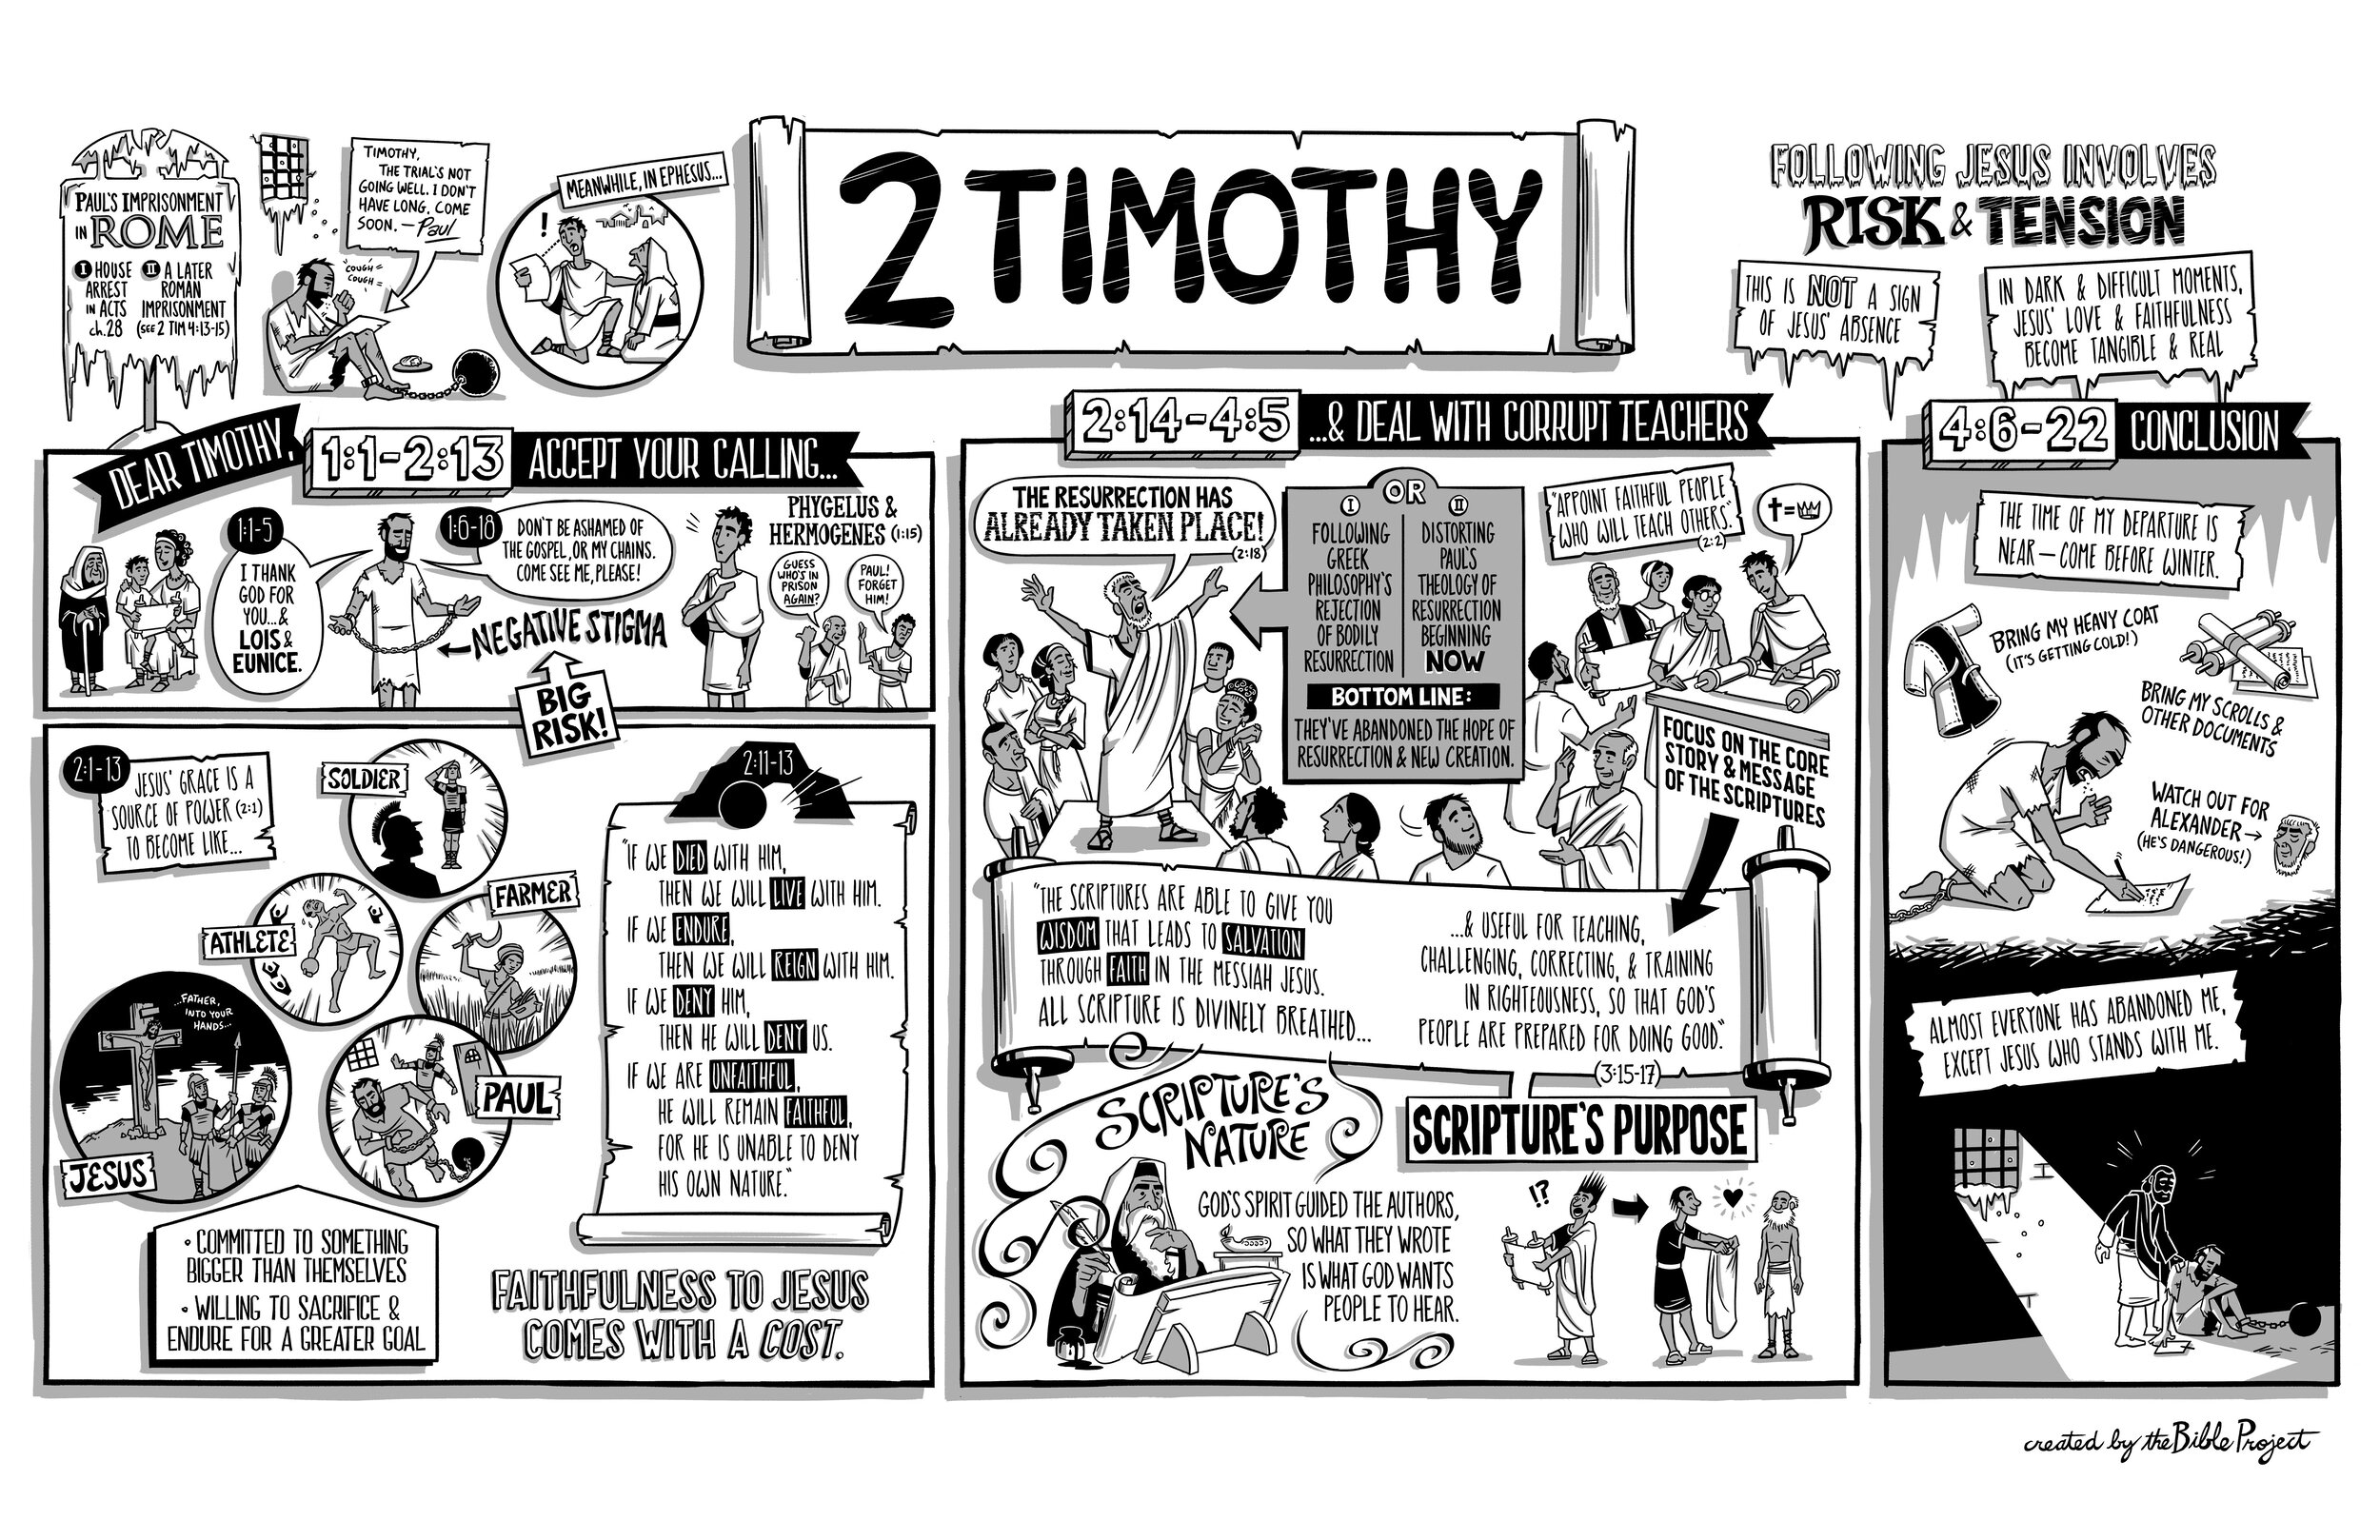 BibleProject: 2 Timothy (Video)